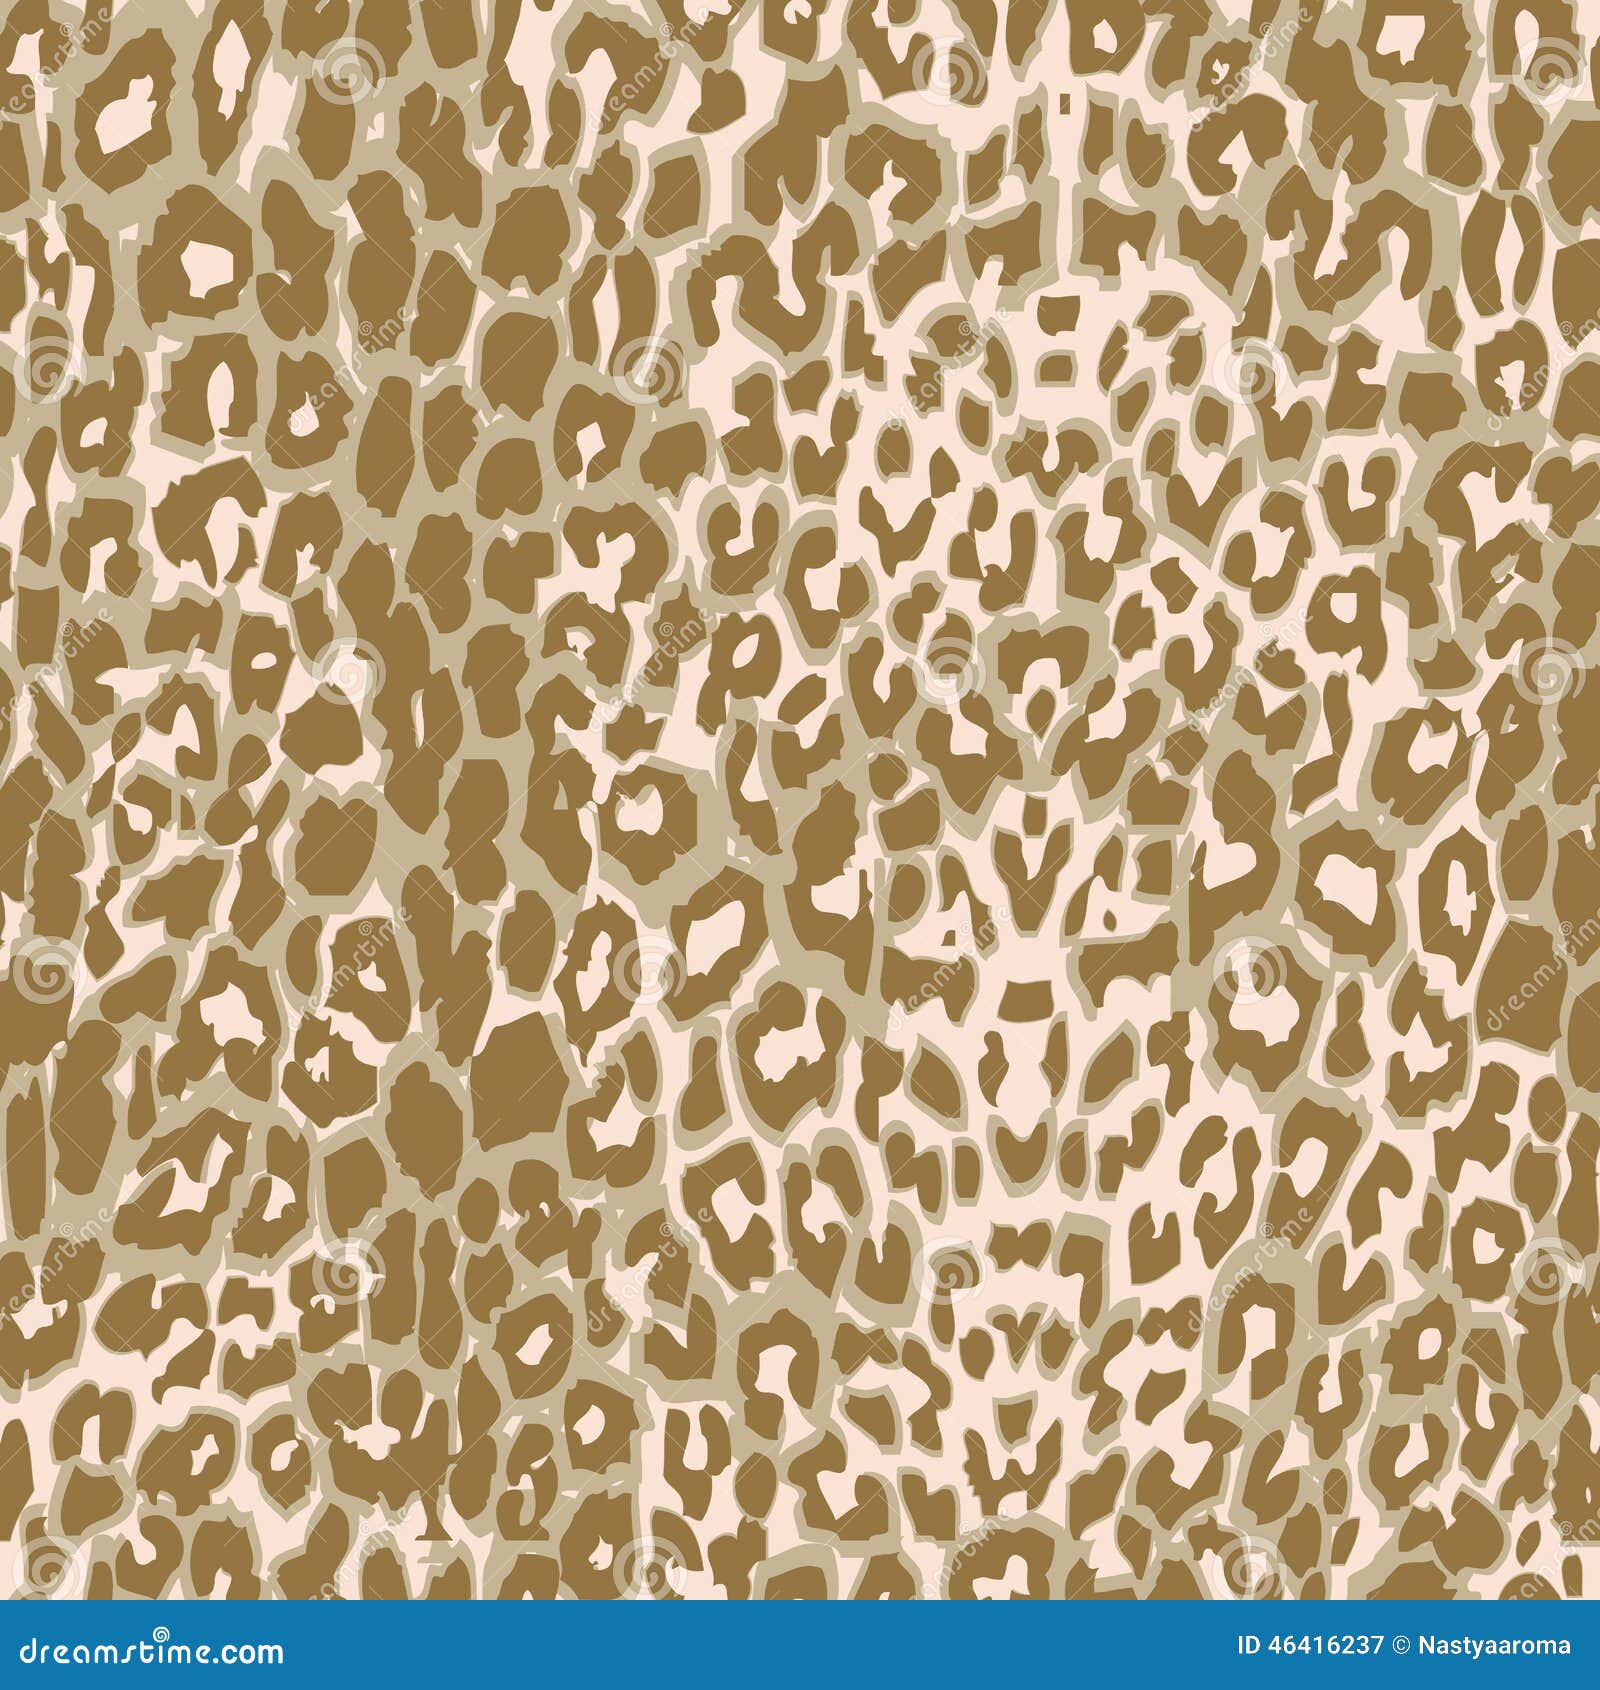 Leopard fabric texture stock vector. Illustration of africa - 46416237